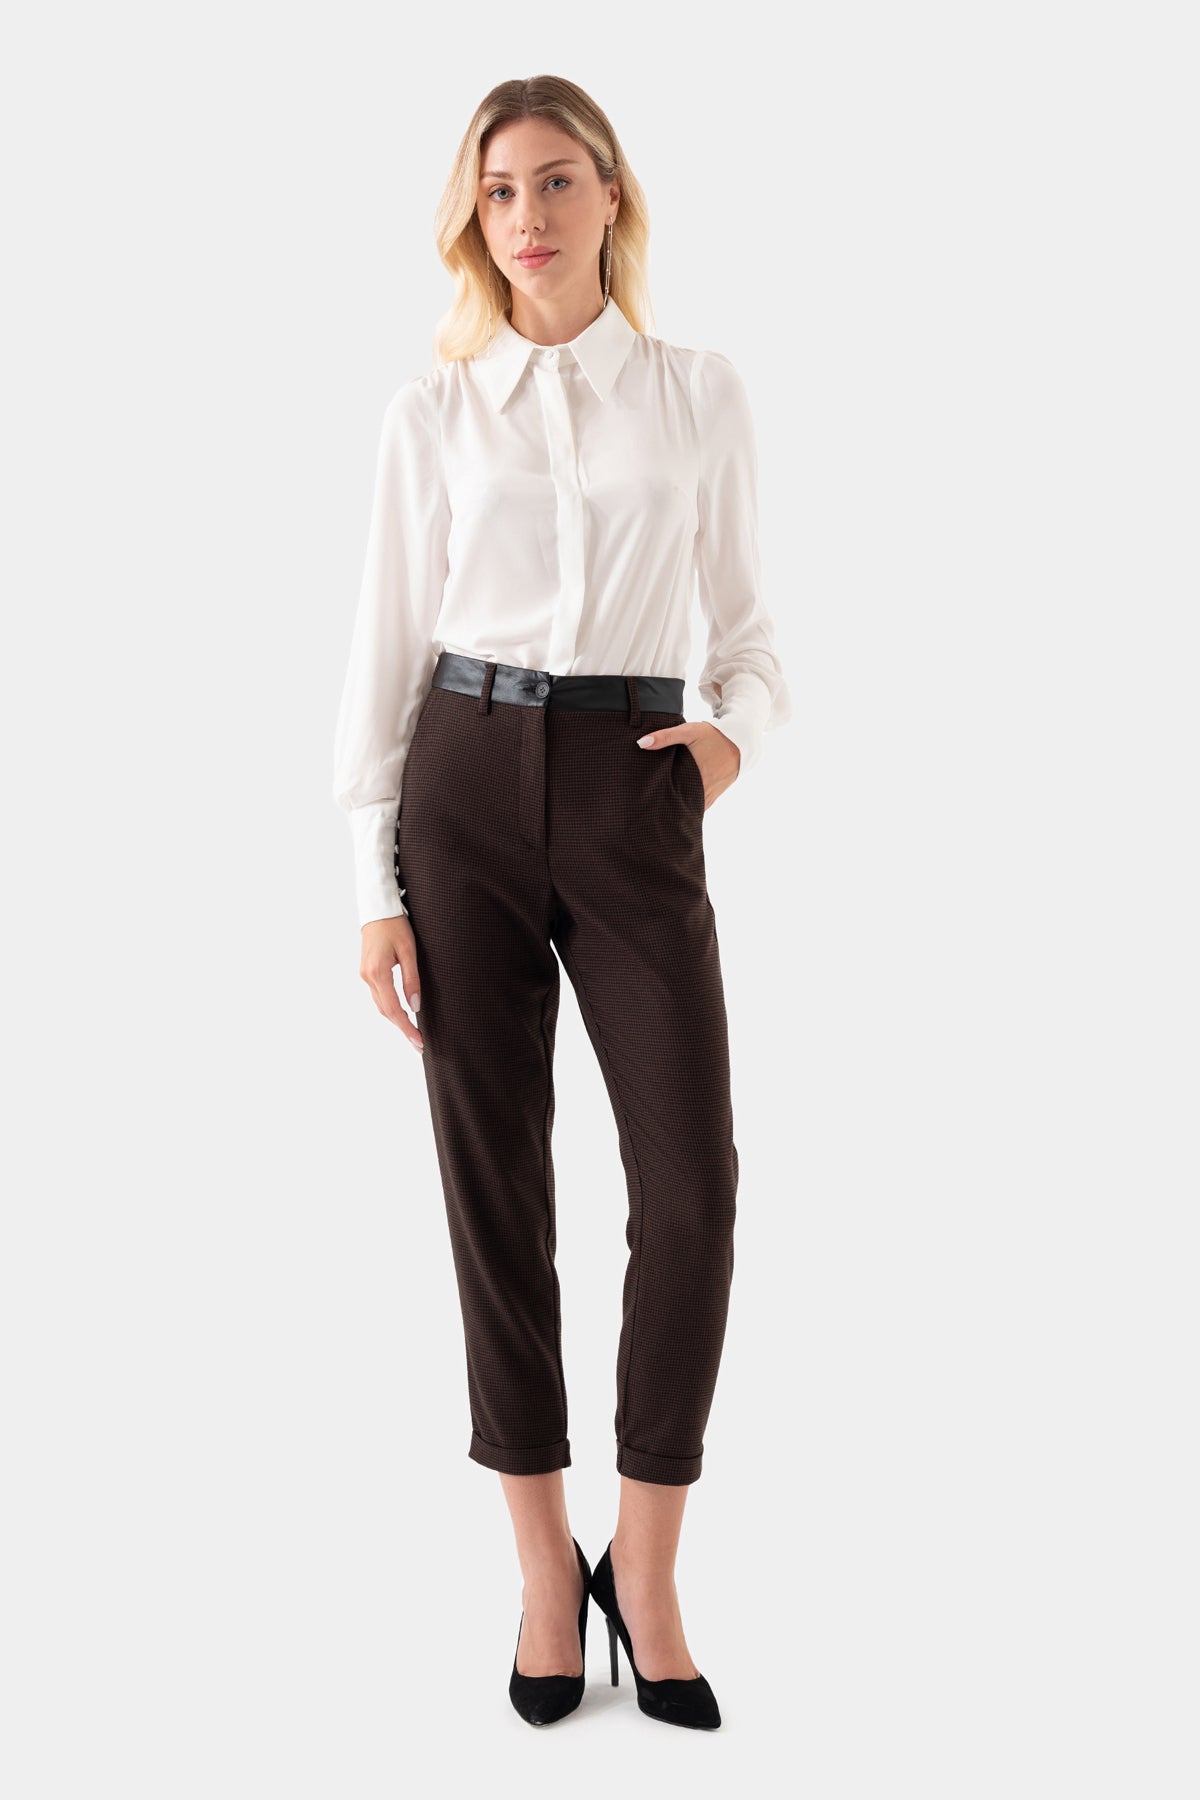 Brown Crowbar Patterned Leather Detailed Women's Trousers